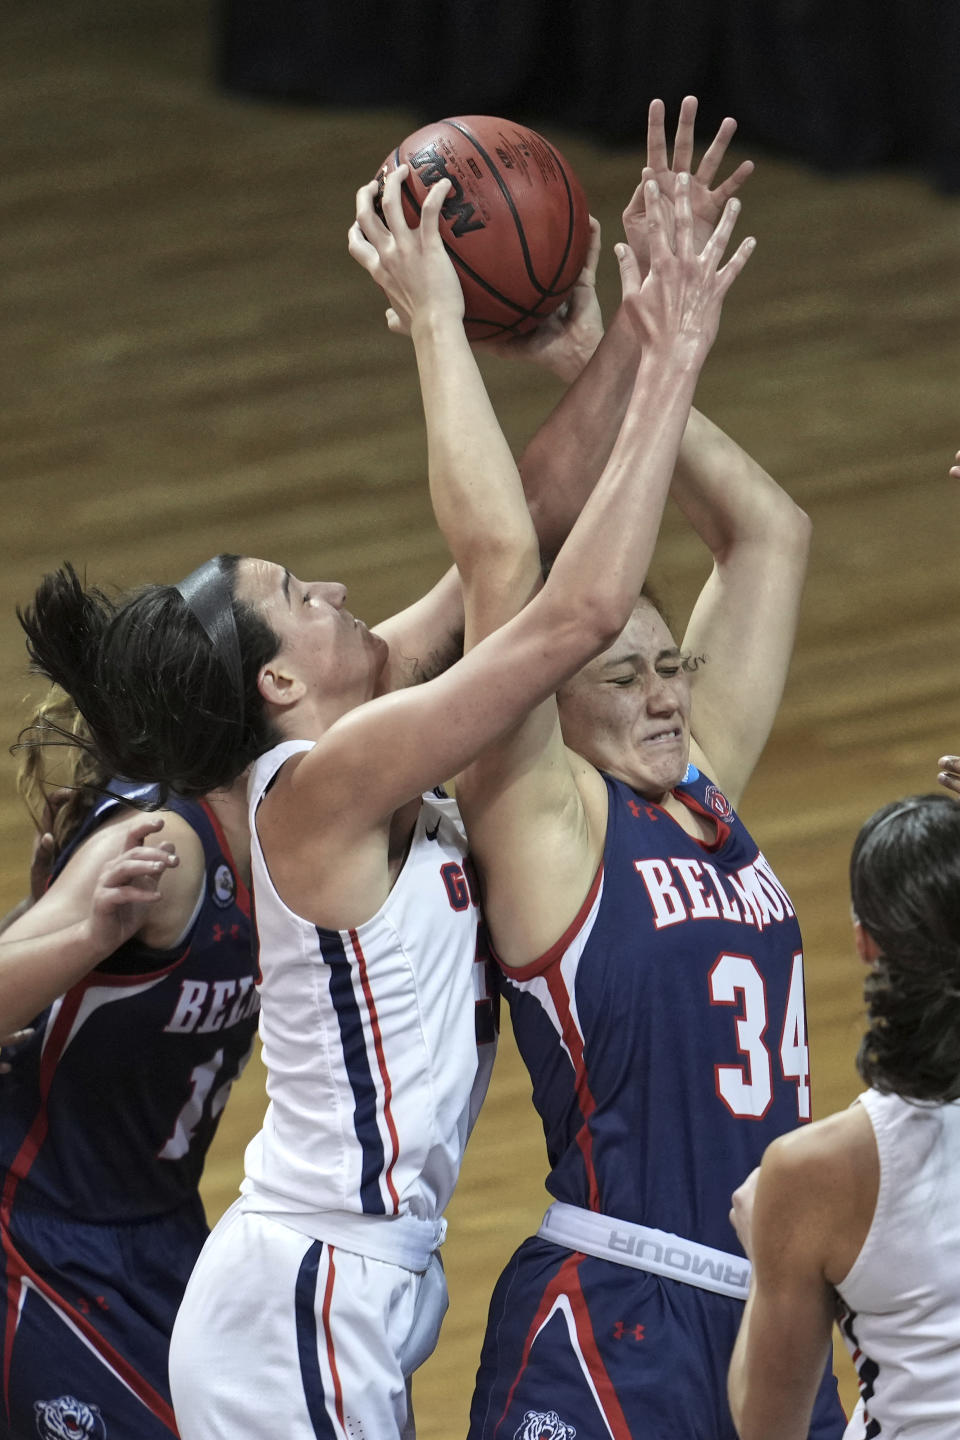 Belmont's Cam Browning (34) and Gonzaga's Jenn Wirth (3) reach for a rebound during the second half of a college basketball game in the first round of the NCAA women's tournament at University Events Center in San Marcos, Texas, Monday, March 22, 2021. (AP Photo/Chuck Burton)